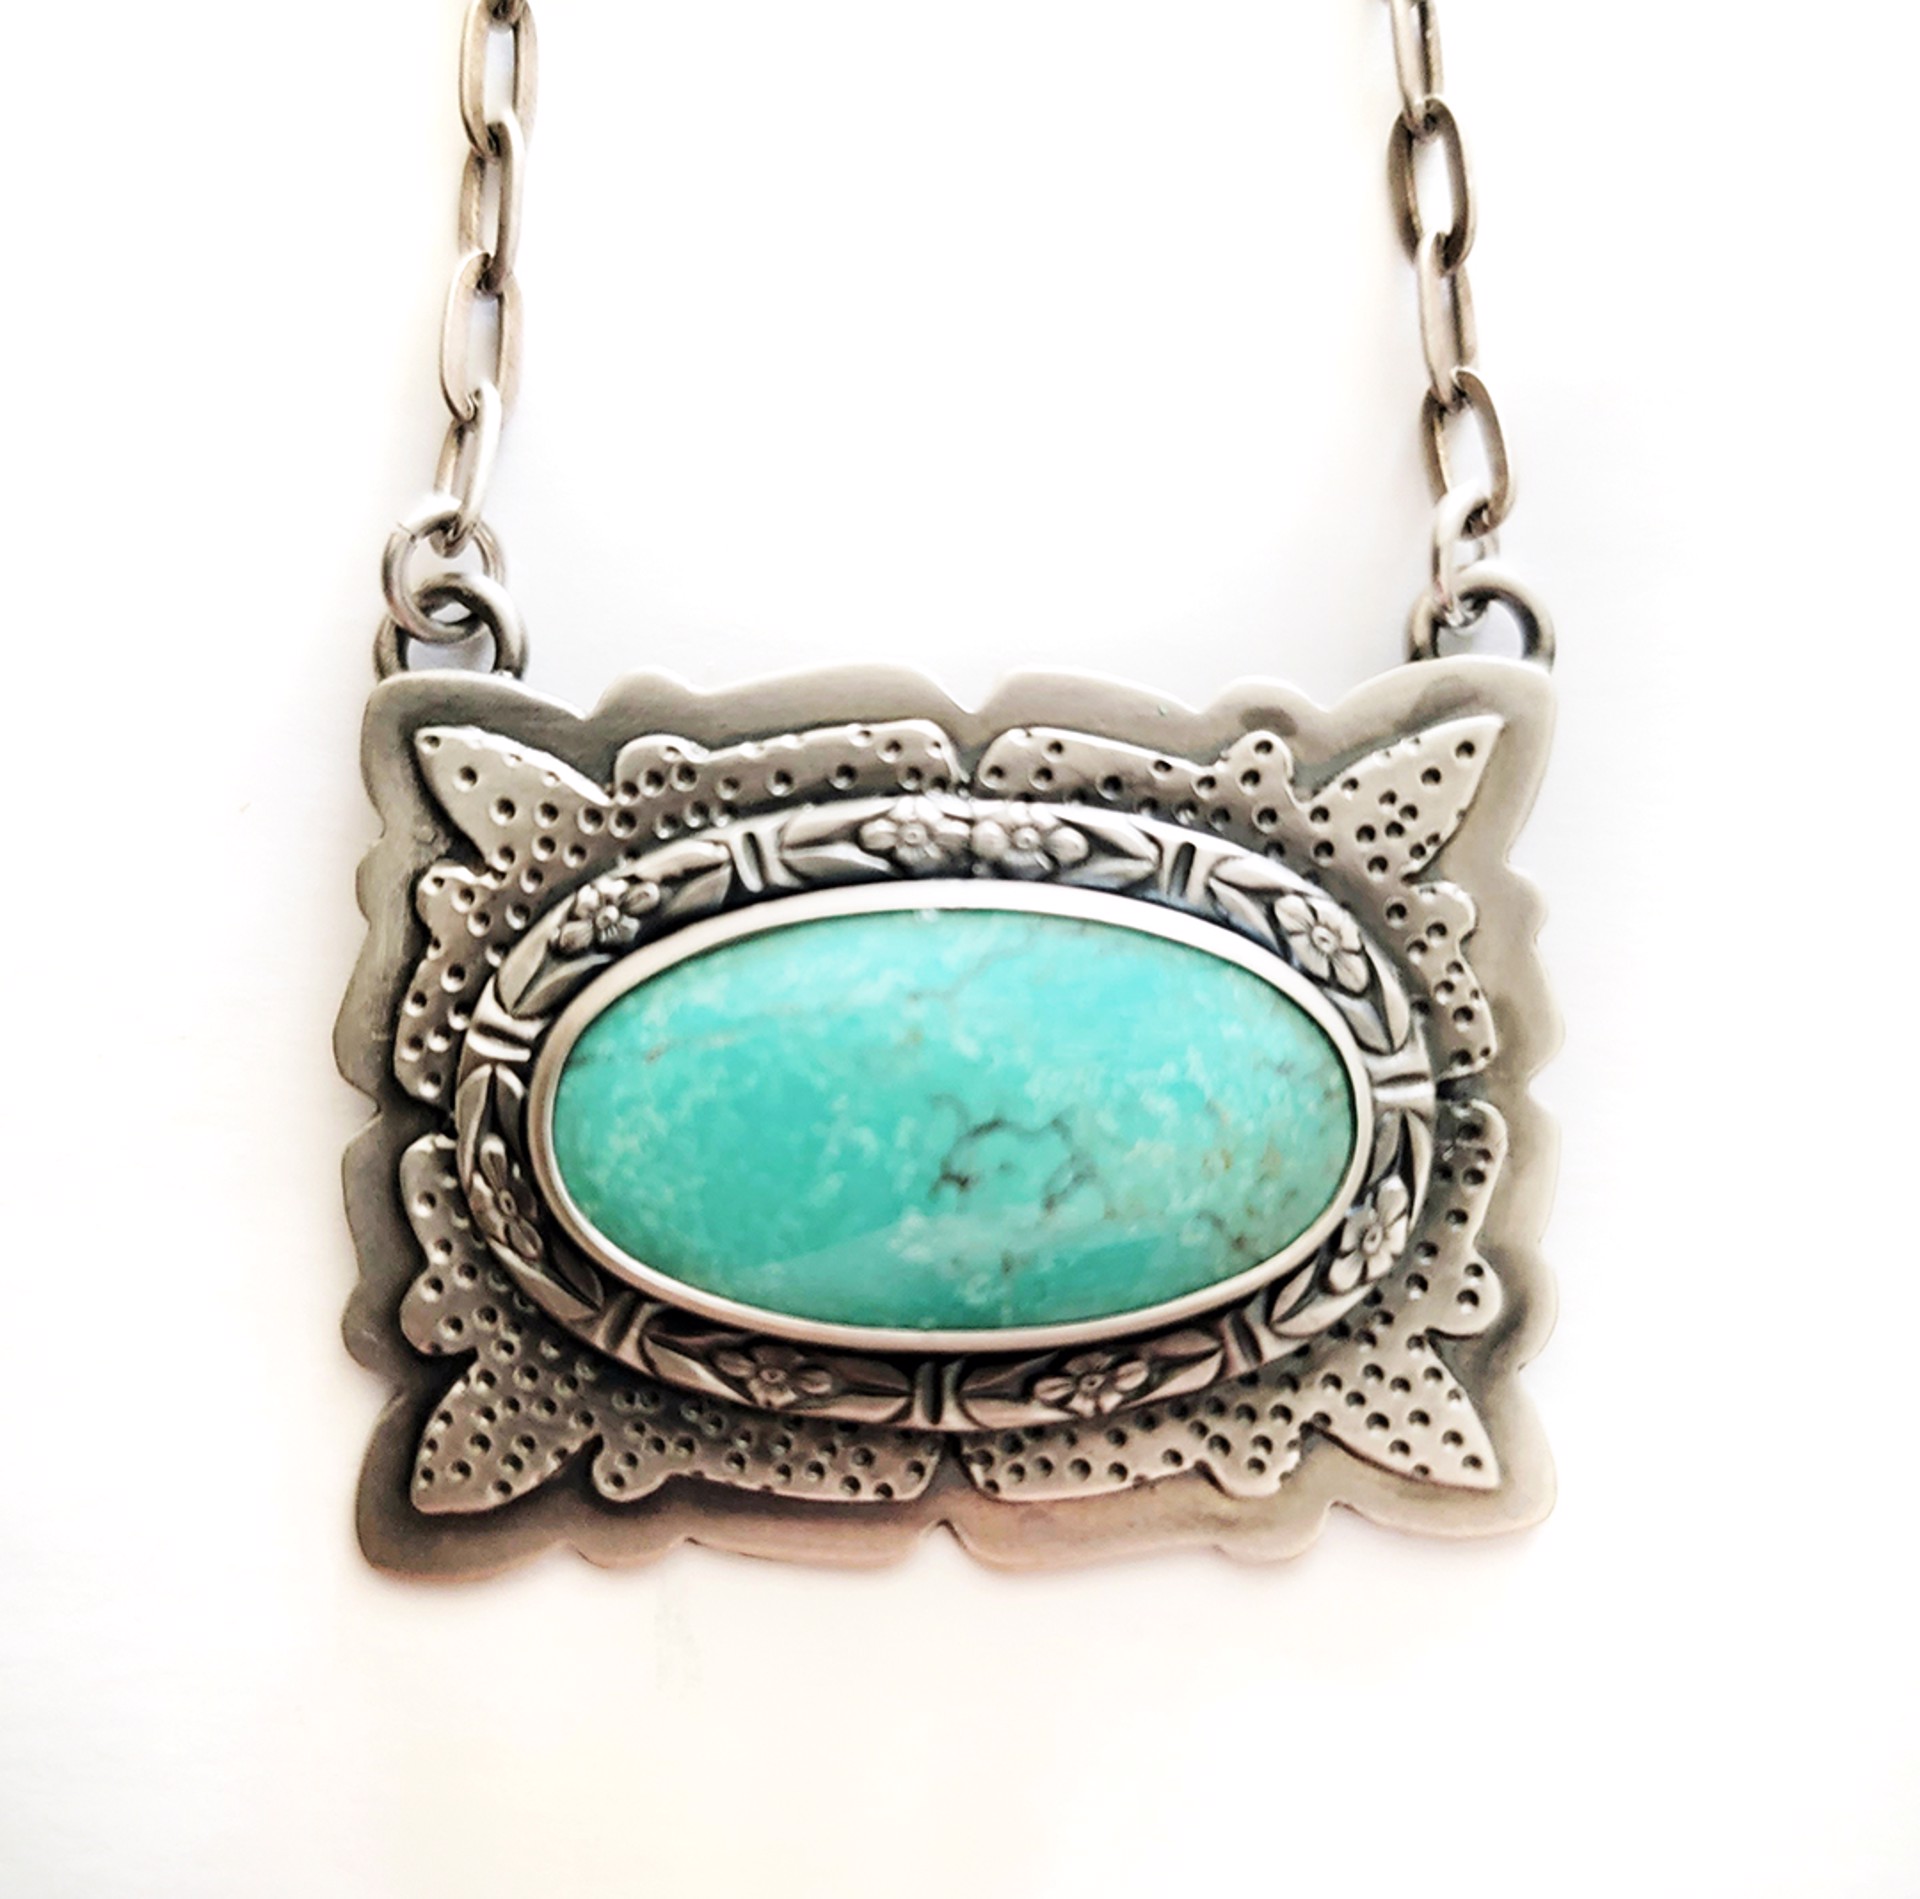 Turquoise Necklace, Silver Chain by Kay Seurat